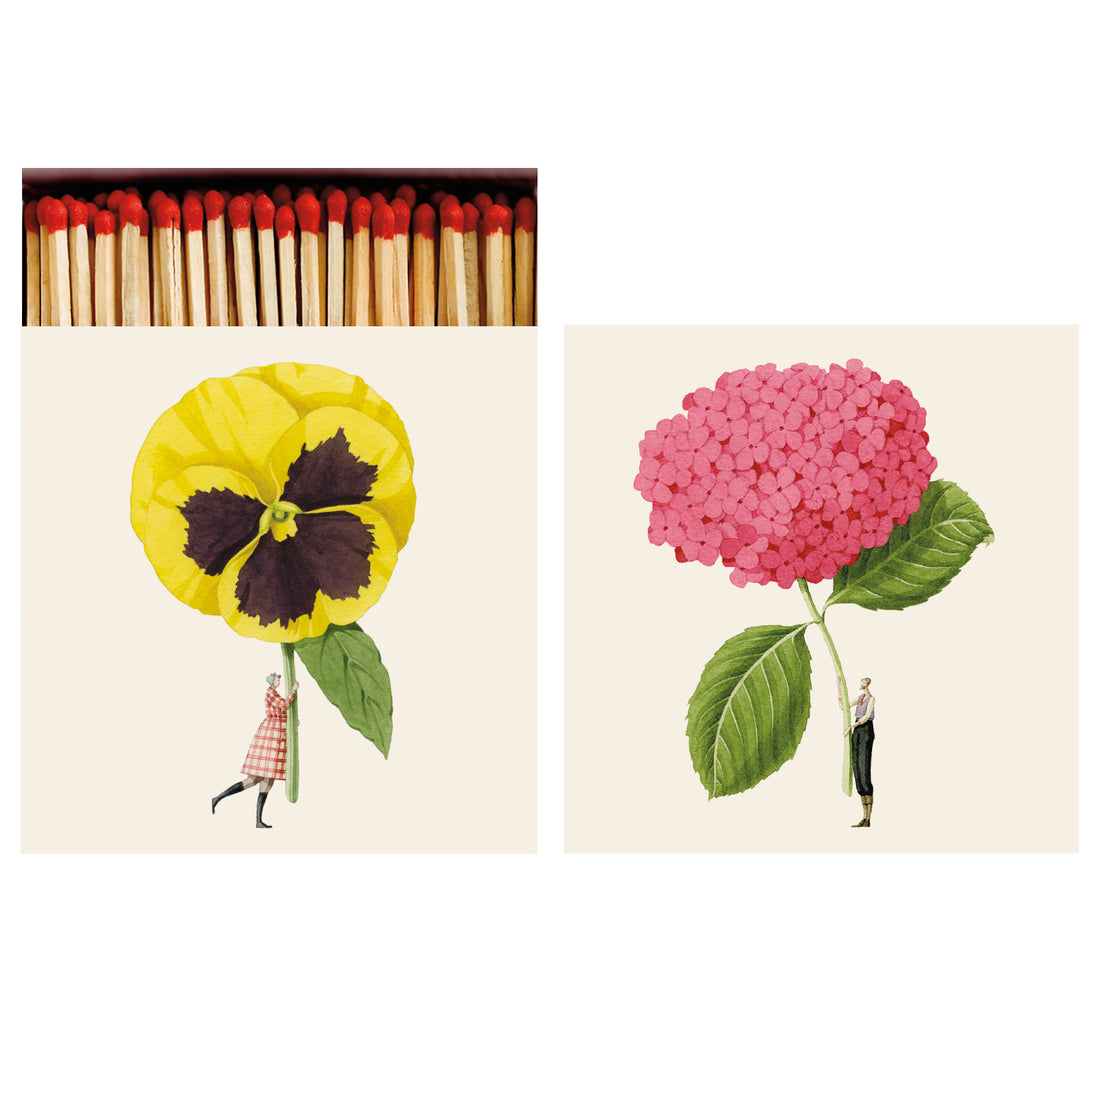 Two sides of a square match box, the left of which is open slightly to reveal the matches inside. The artwork on one side depicts a small woman in a dress holding a gigantic yellow pansy by the stem, and the other side depicts a small man holding pink hydrangeas by the stem on the cream background.